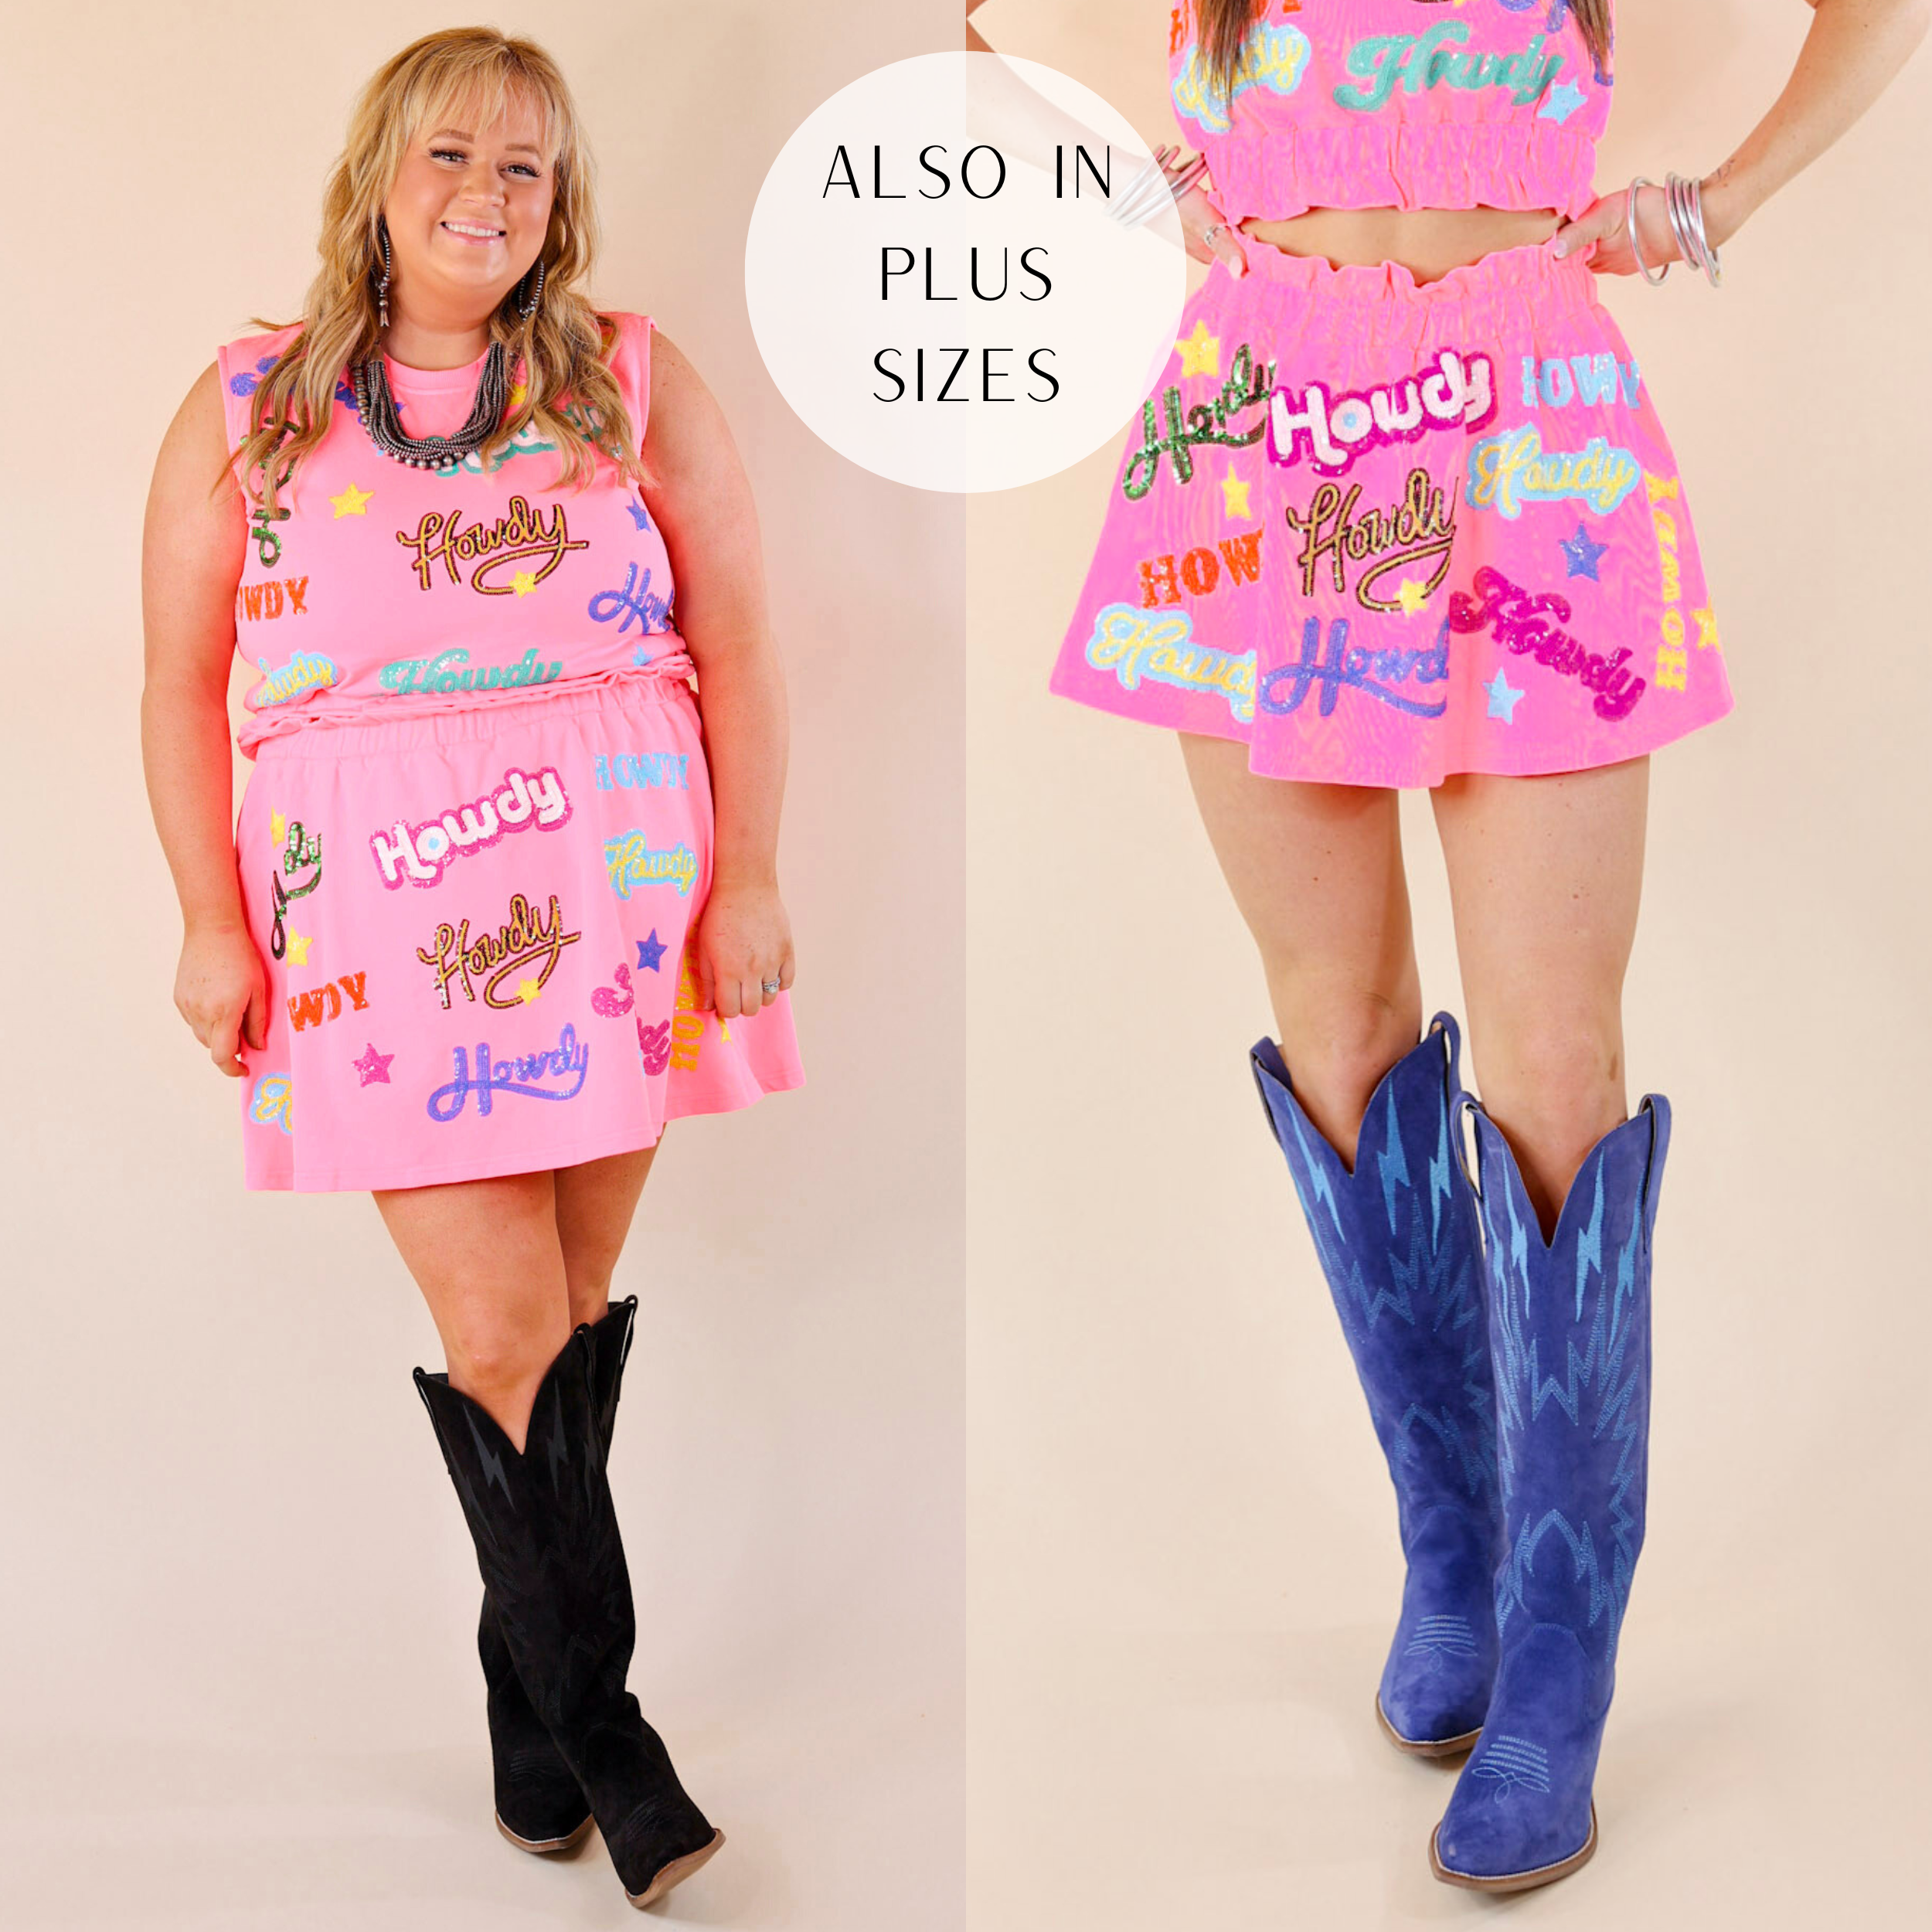 Models are wearing a pink skirt with the words "Howdy" in multiple colors. Size plus model has it paired with black boots, silver jewelry, and the matching top. Size small has it paired with blue dingo boots, silver jewelry, and the matching top. 